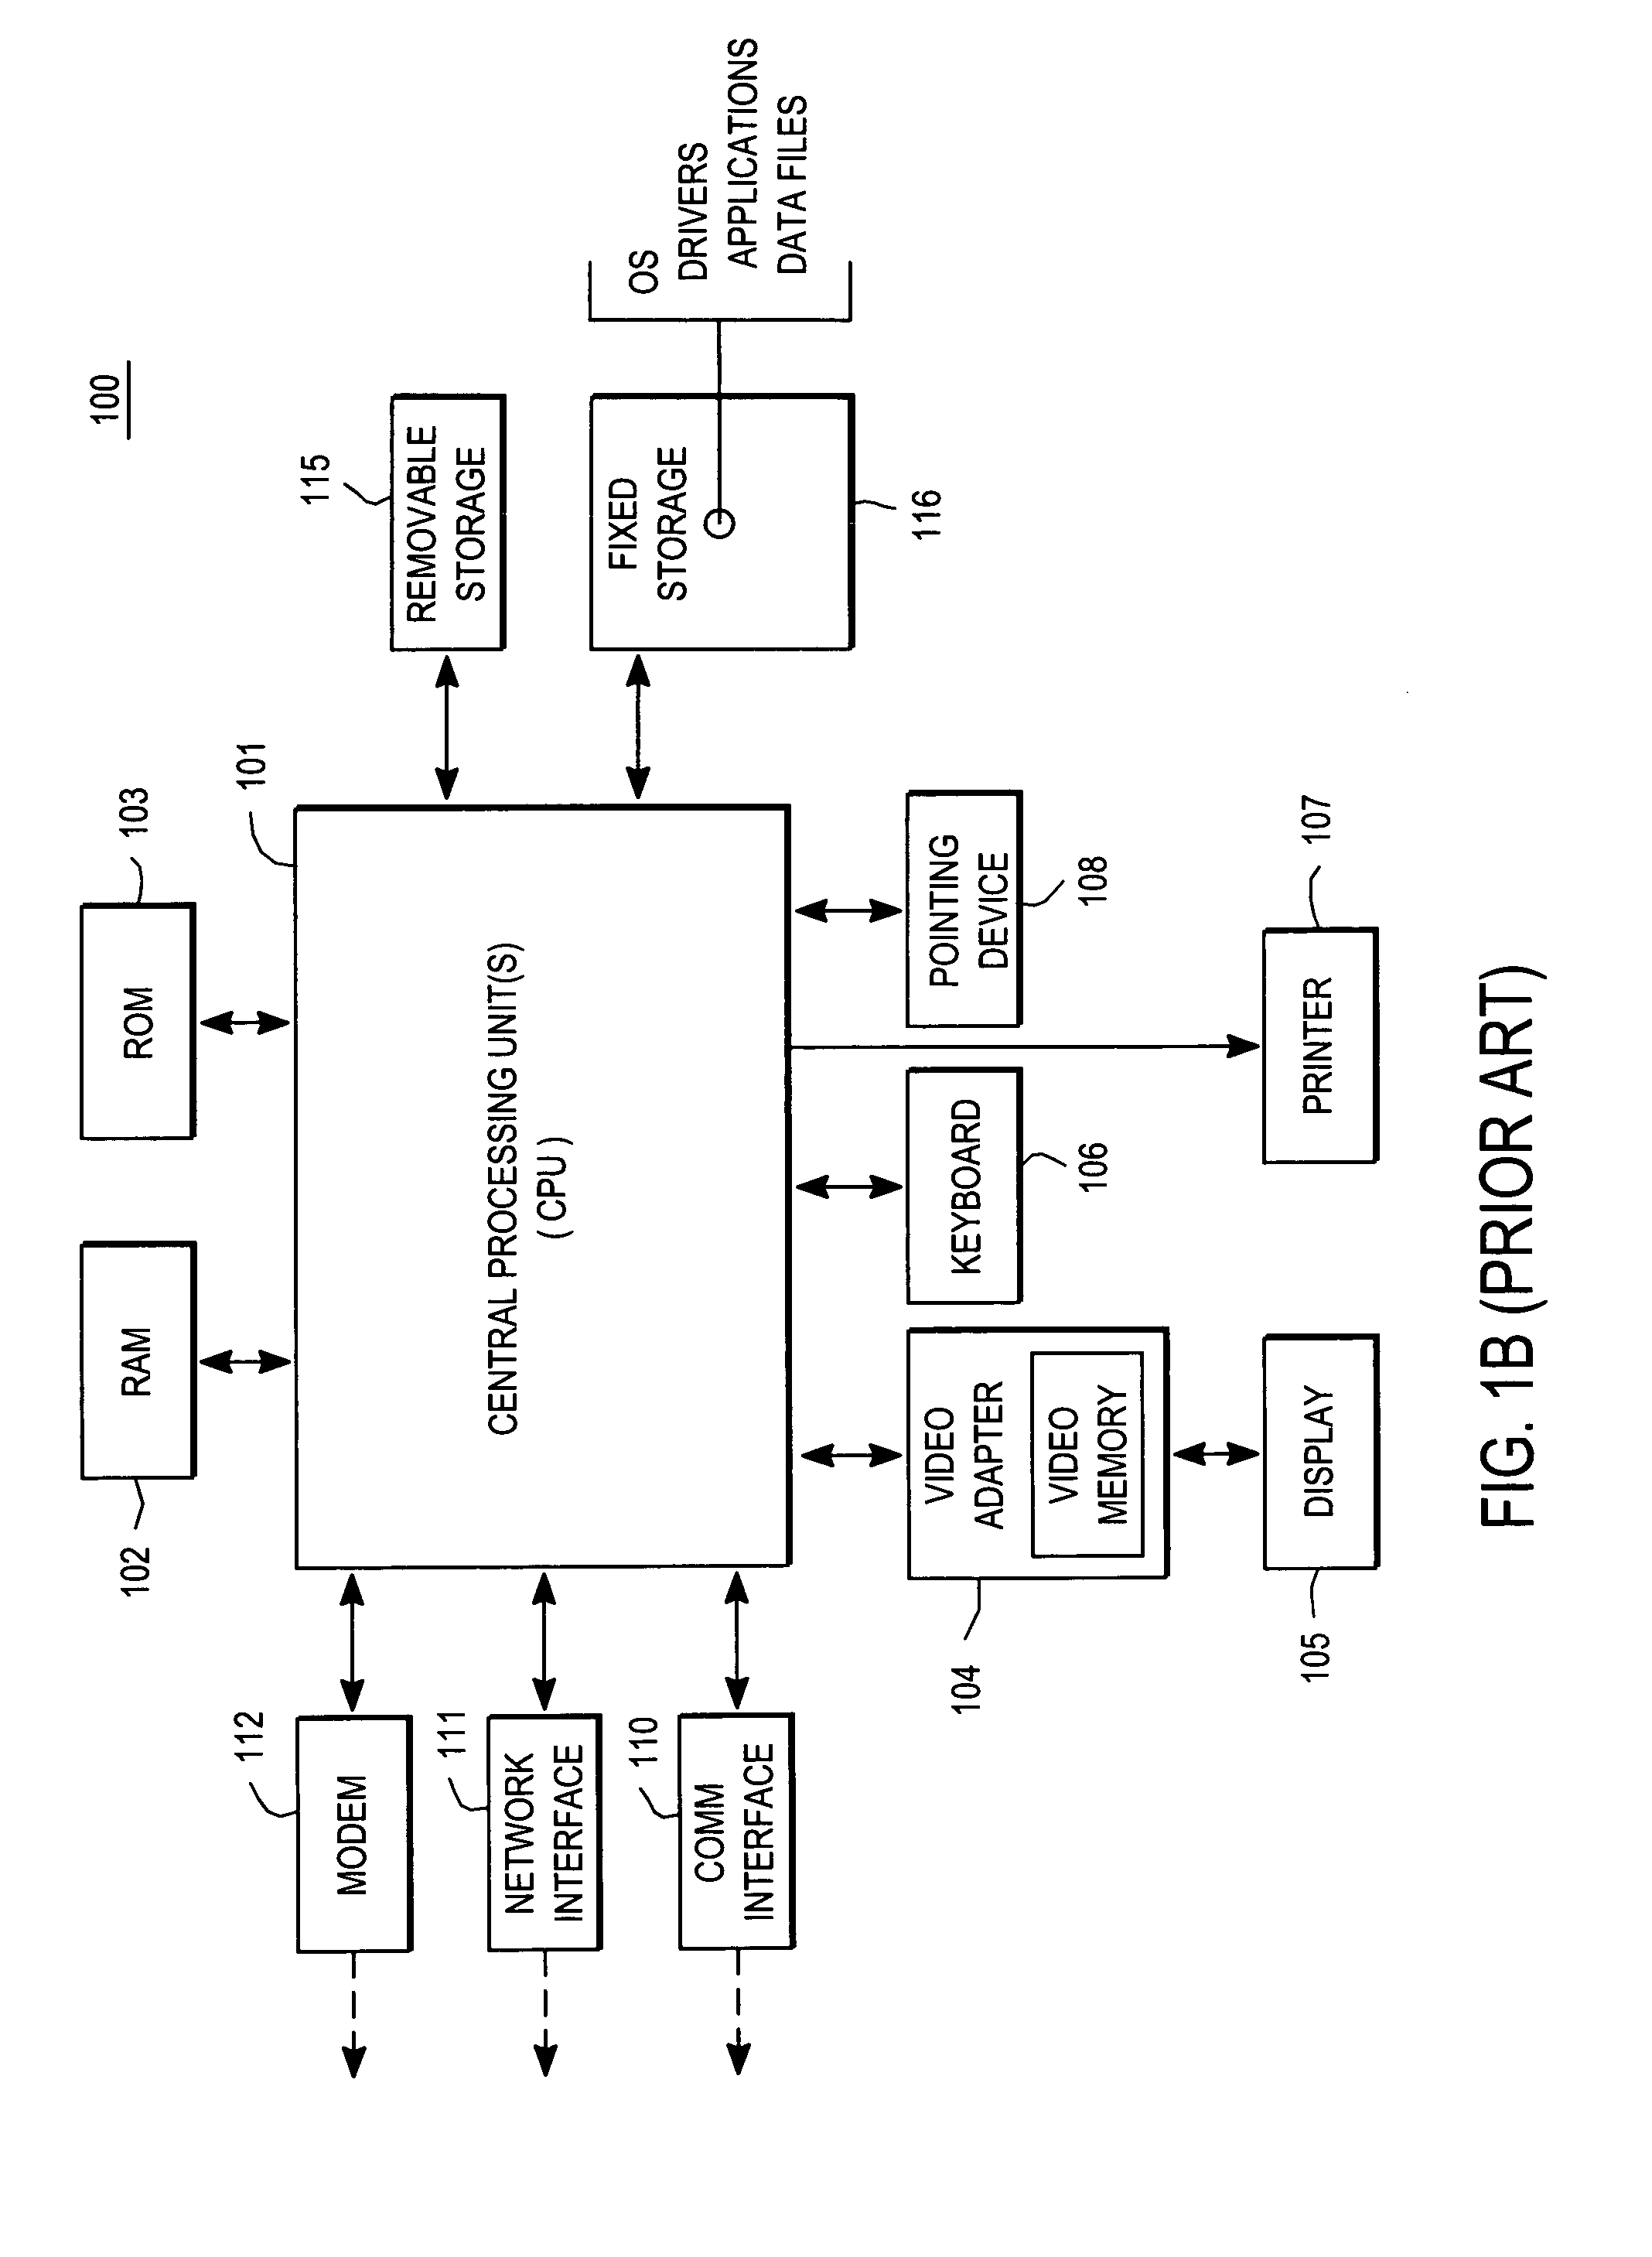 System and methods for accent classification and adaptation